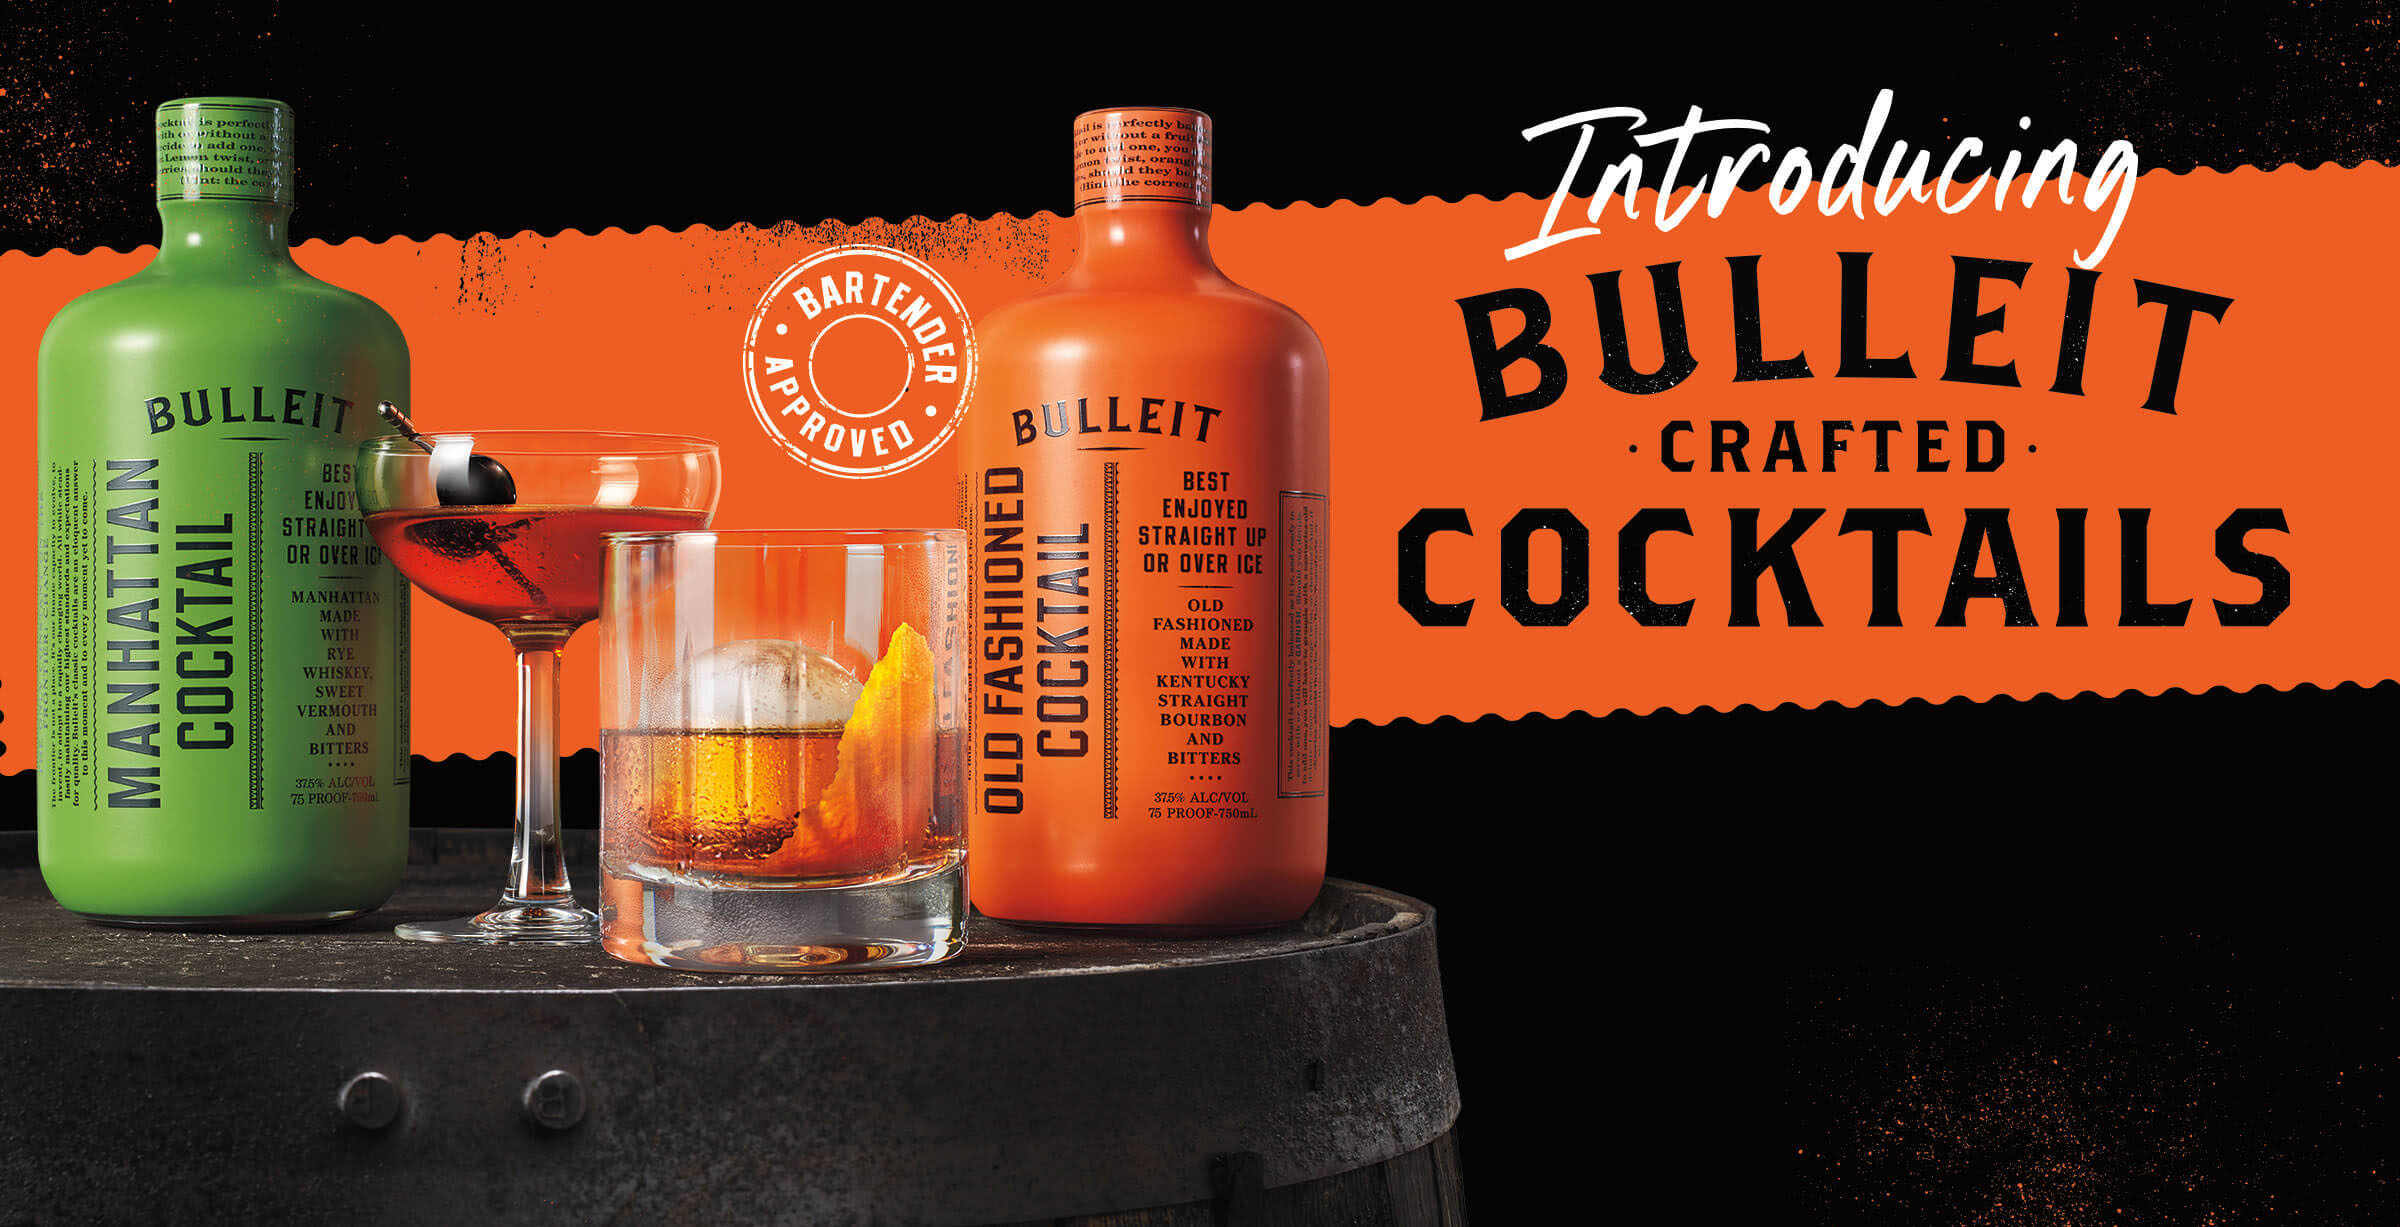 Bulleit Frontier Whiskey Introduces Ready to Serve Cocktails: Bulleit Crafted Cocktails in Two Classic Recipes